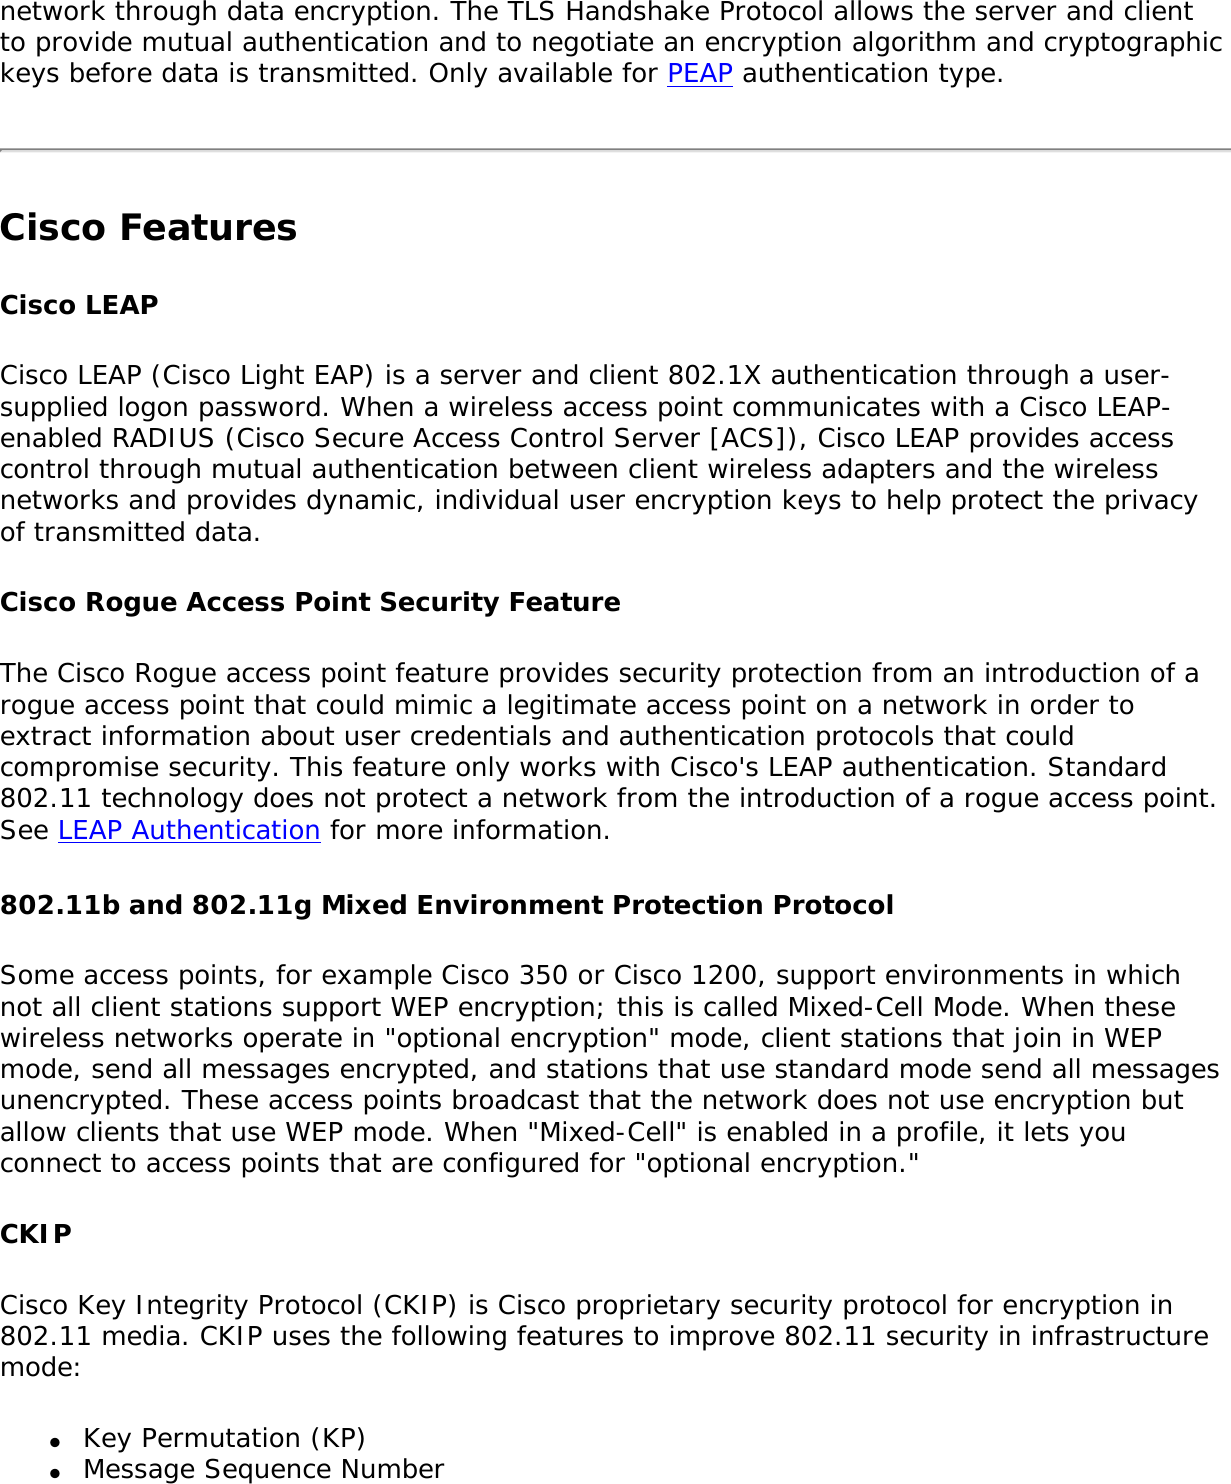 network through data encryption. The TLS Handshake Protocol allows the server and client to provide mutual authentication and to negotiate an encryption algorithm and cryptographic keys before data is transmitted. Only available for PEAP authentication type.Cisco FeaturesCisco LEAP Cisco LEAP (Cisco Light EAP) is a server and client 802.1X authentication through a user-supplied logon password. When a wireless access point communicates with a Cisco LEAP-enabled RADIUS (Cisco Secure Access Control Server [ACS]), Cisco LEAP provides access control through mutual authentication between client wireless adapters and the wireless networks and provides dynamic, individual user encryption keys to help protect the privacy of transmitted data.Cisco Rogue Access Point Security FeatureThe Cisco Rogue access point feature provides security protection from an introduction of a rogue access point that could mimic a legitimate access point on a network in order to extract information about user credentials and authentication protocols that could compromise security. This feature only works with Cisco&apos;s LEAP authentication. Standard 802.11 technology does not protect a network from the introduction of a rogue access point. See LEAP Authentication for more information.802.11b and 802.11g Mixed Environment Protection ProtocolSome access points, for example Cisco 350 or Cisco 1200, support environments in which not all client stations support WEP encryption; this is called Mixed-Cell Mode. When these wireless networks operate in &quot;optional encryption&quot; mode, client stations that join in WEP mode, send all messages encrypted, and stations that use standard mode send all messages unencrypted. These access points broadcast that the network does not use encryption but allow clients that use WEP mode. When &quot;Mixed-Cell&quot; is enabled in a profile, it lets you connect to access points that are configured for &quot;optional encryption.&quot;CKIPCisco Key Integrity Protocol (CKIP) is Cisco proprietary security protocol for encryption in 802.11 media. CKIP uses the following features to improve 802.11 security in infrastructure mode:●     Key Permutation (KP)●     Message Sequence Number